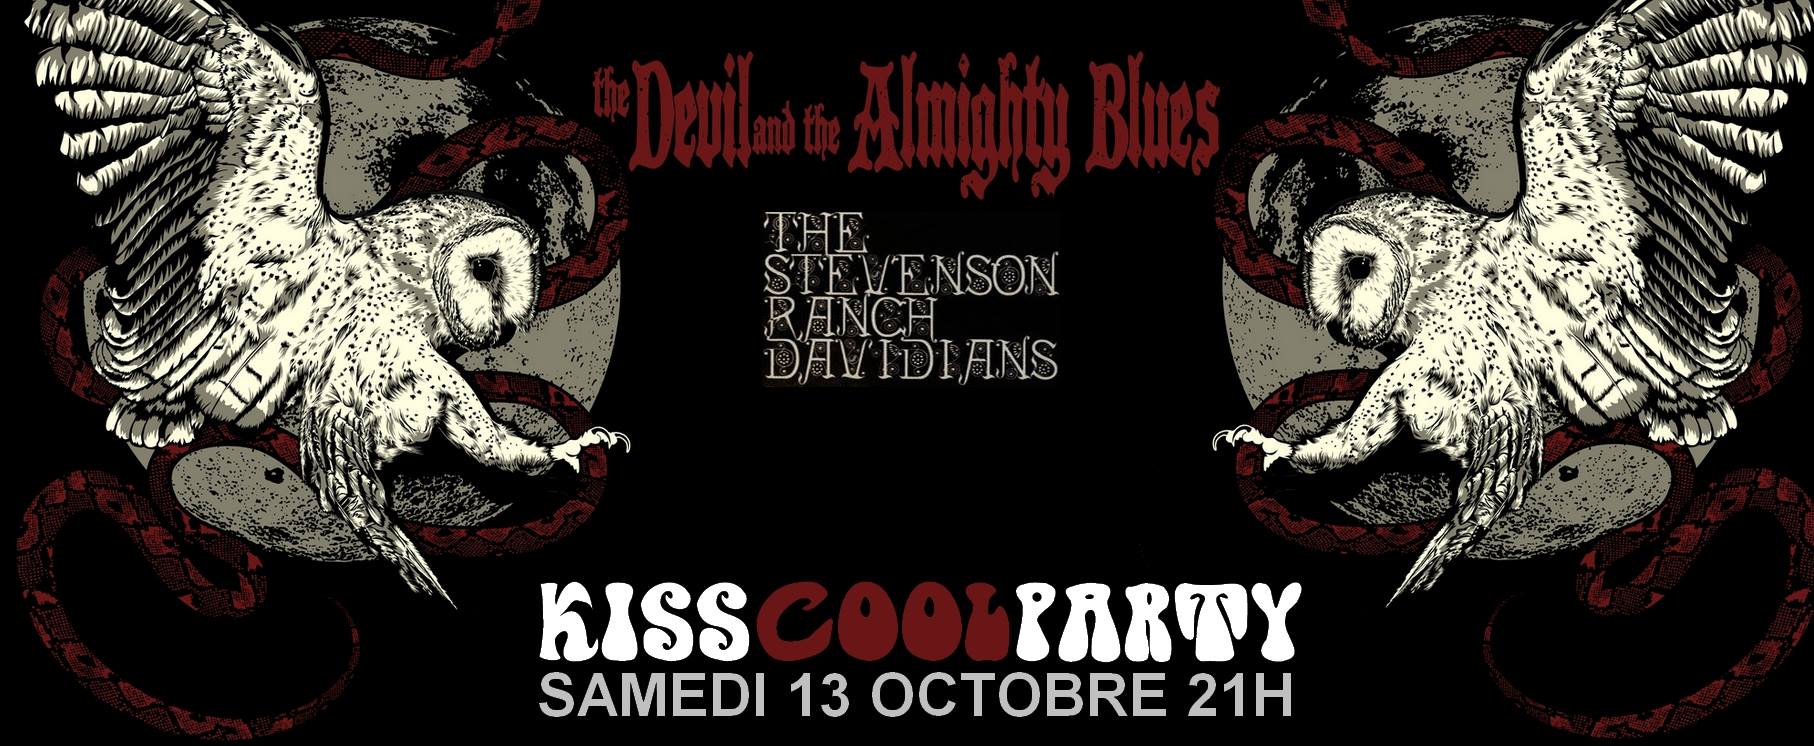 The Devil and the allmighty Blues / The  Stevenson Ranch Davidians